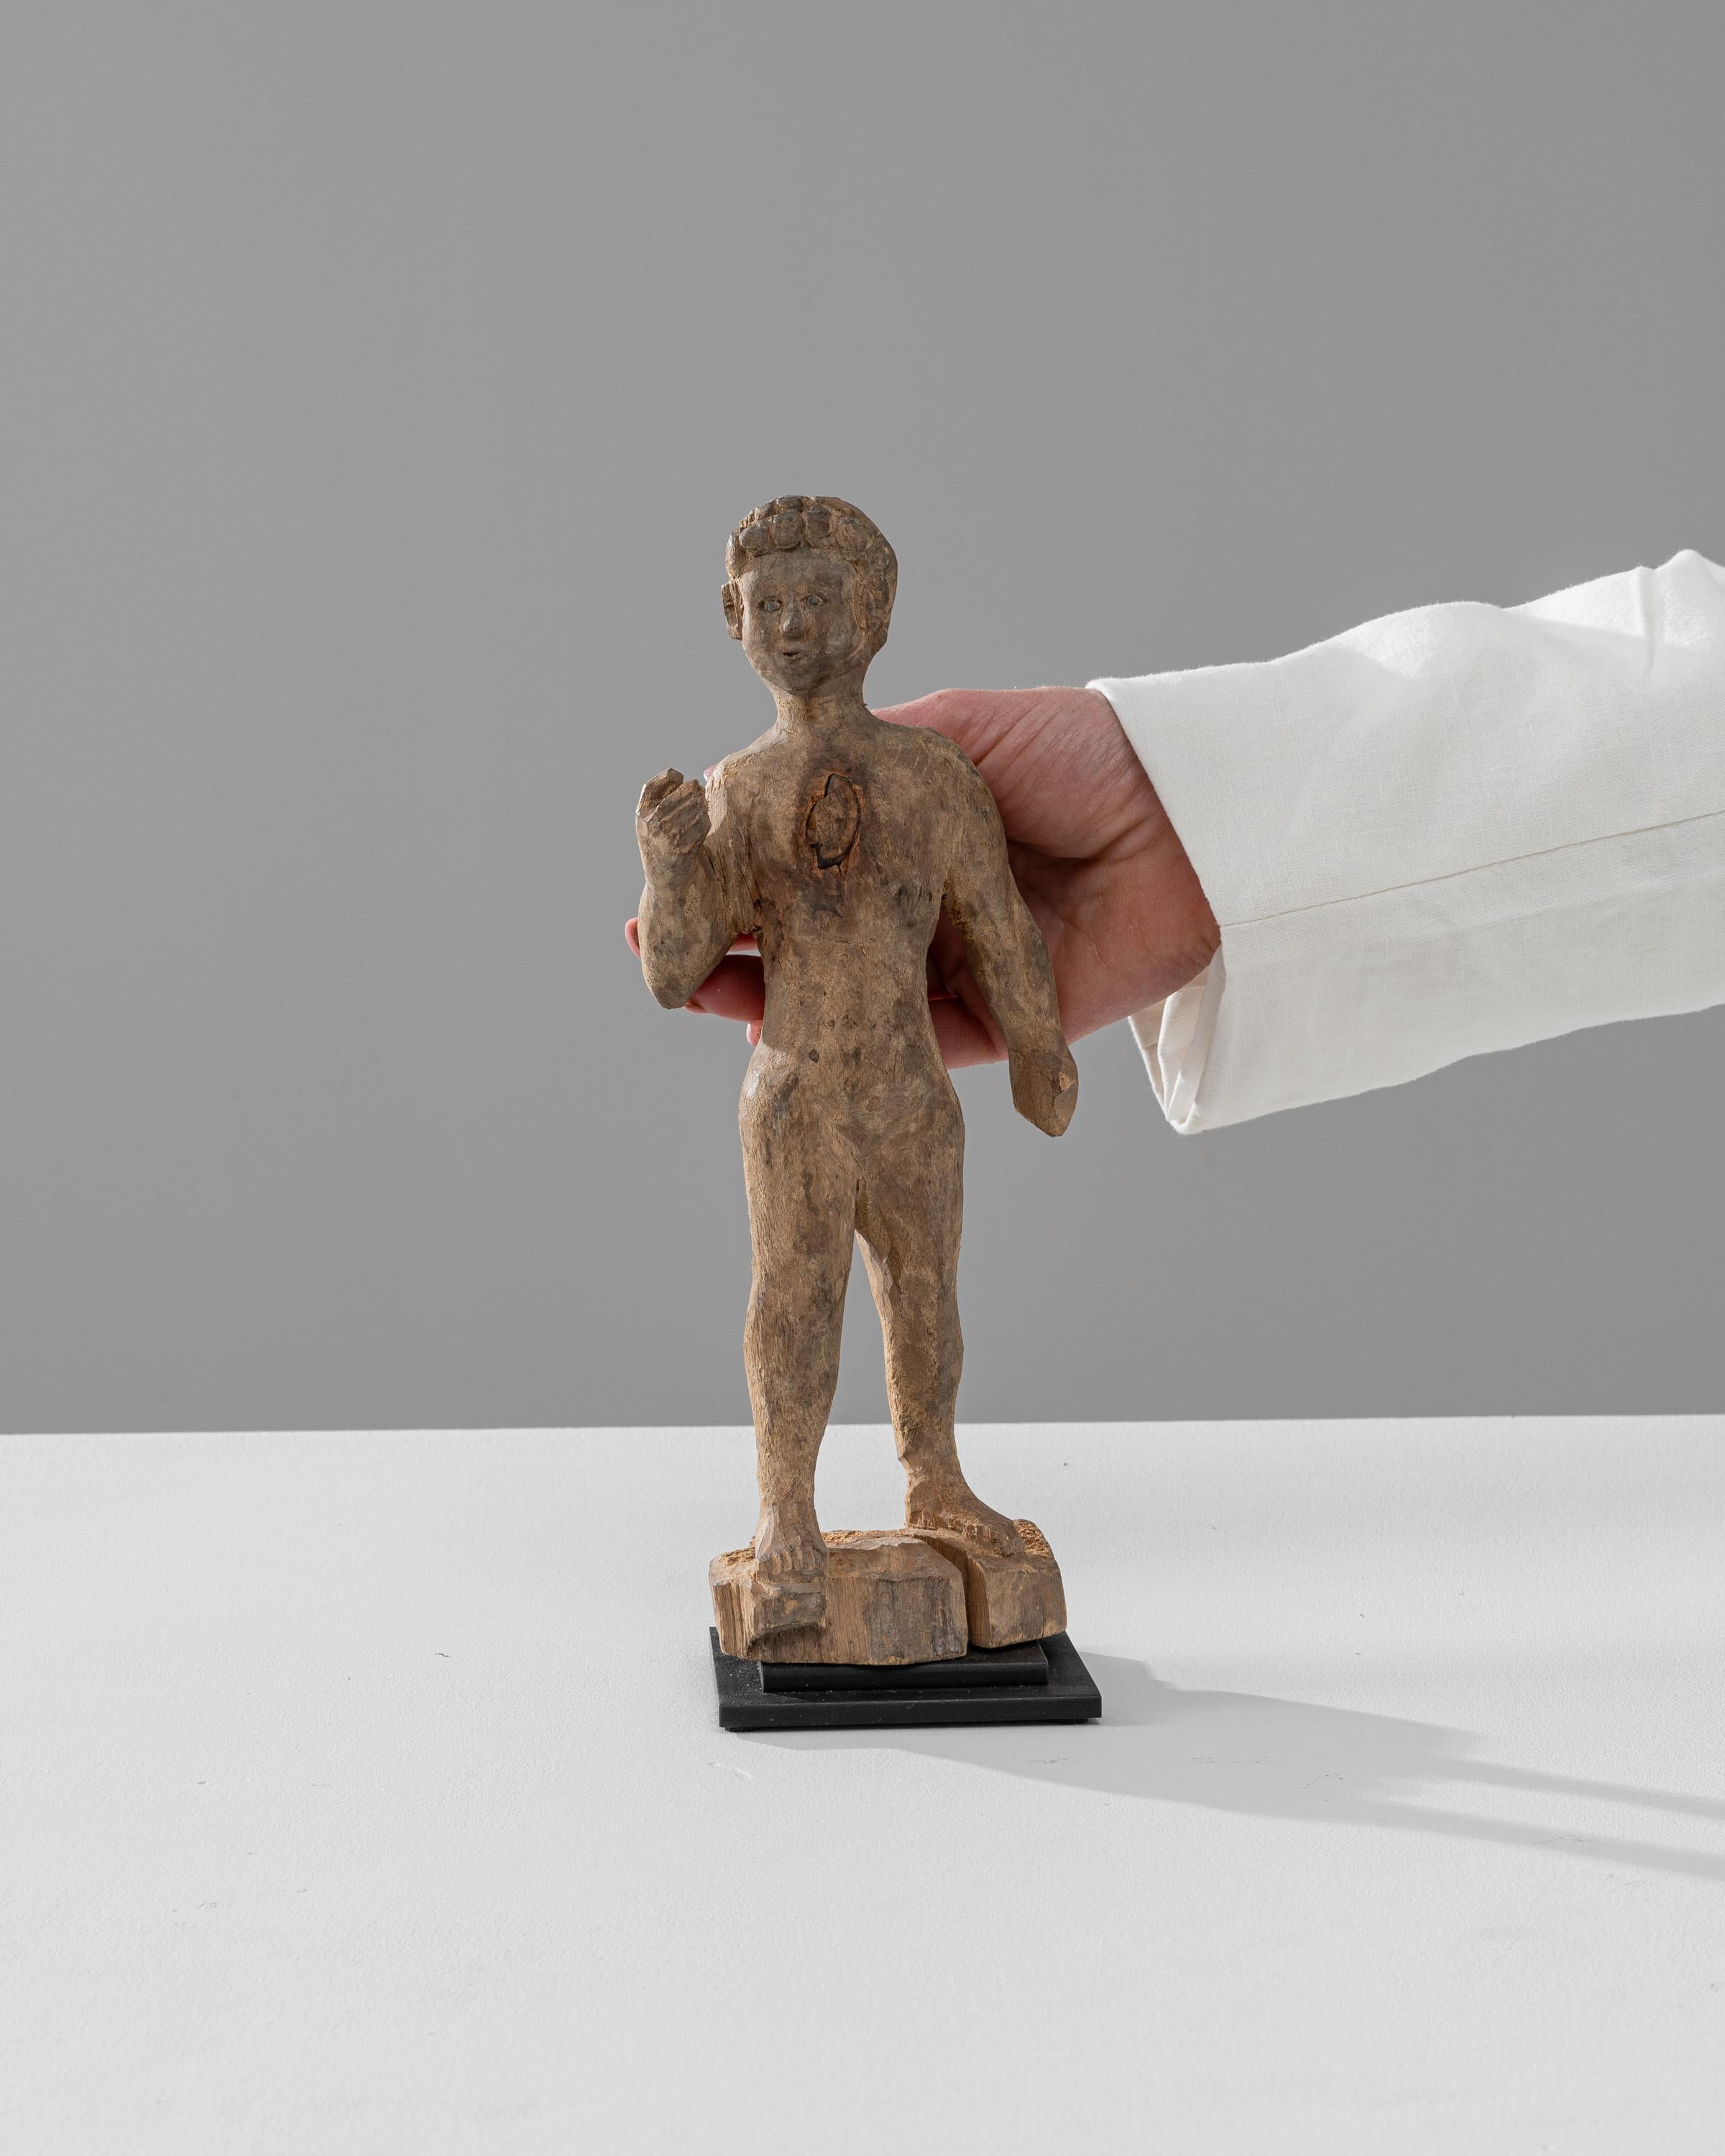 This charming 19th Century French Wooden Decoration on Metal Stand captures the essence of antique statuary and the enduring beauty of folk art. The figure, a carved wooden boy with a joyful expression and dynamic pose, stands on a simple yet